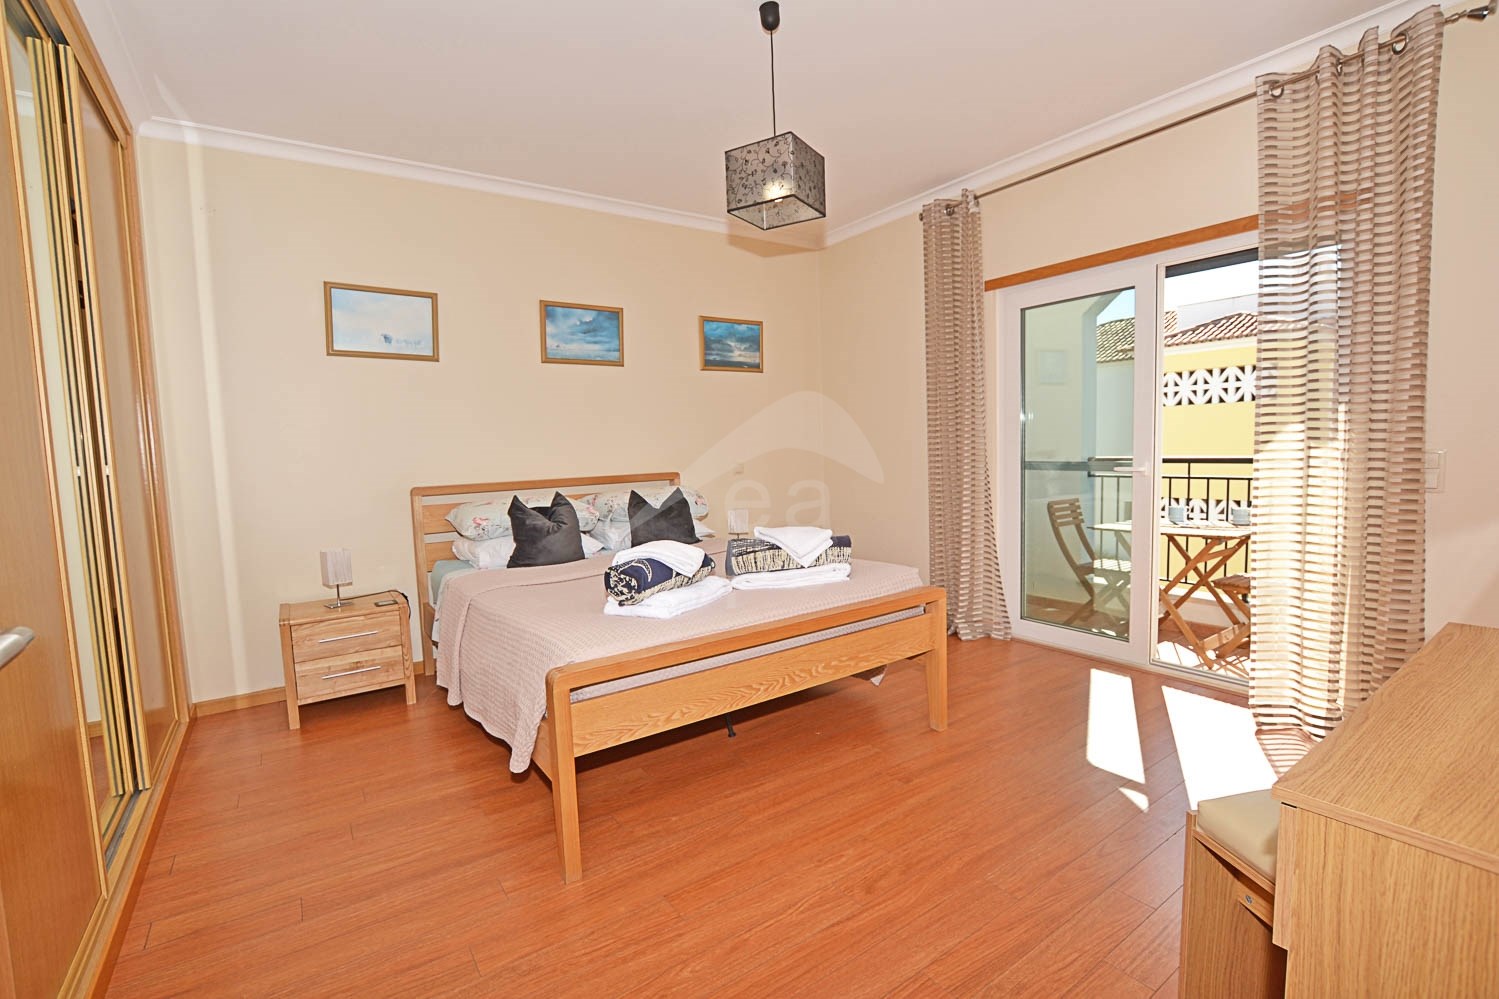 Modern Two Bedroom Apartment with Swimming Pool and Garage in a popular resort in Cabanas